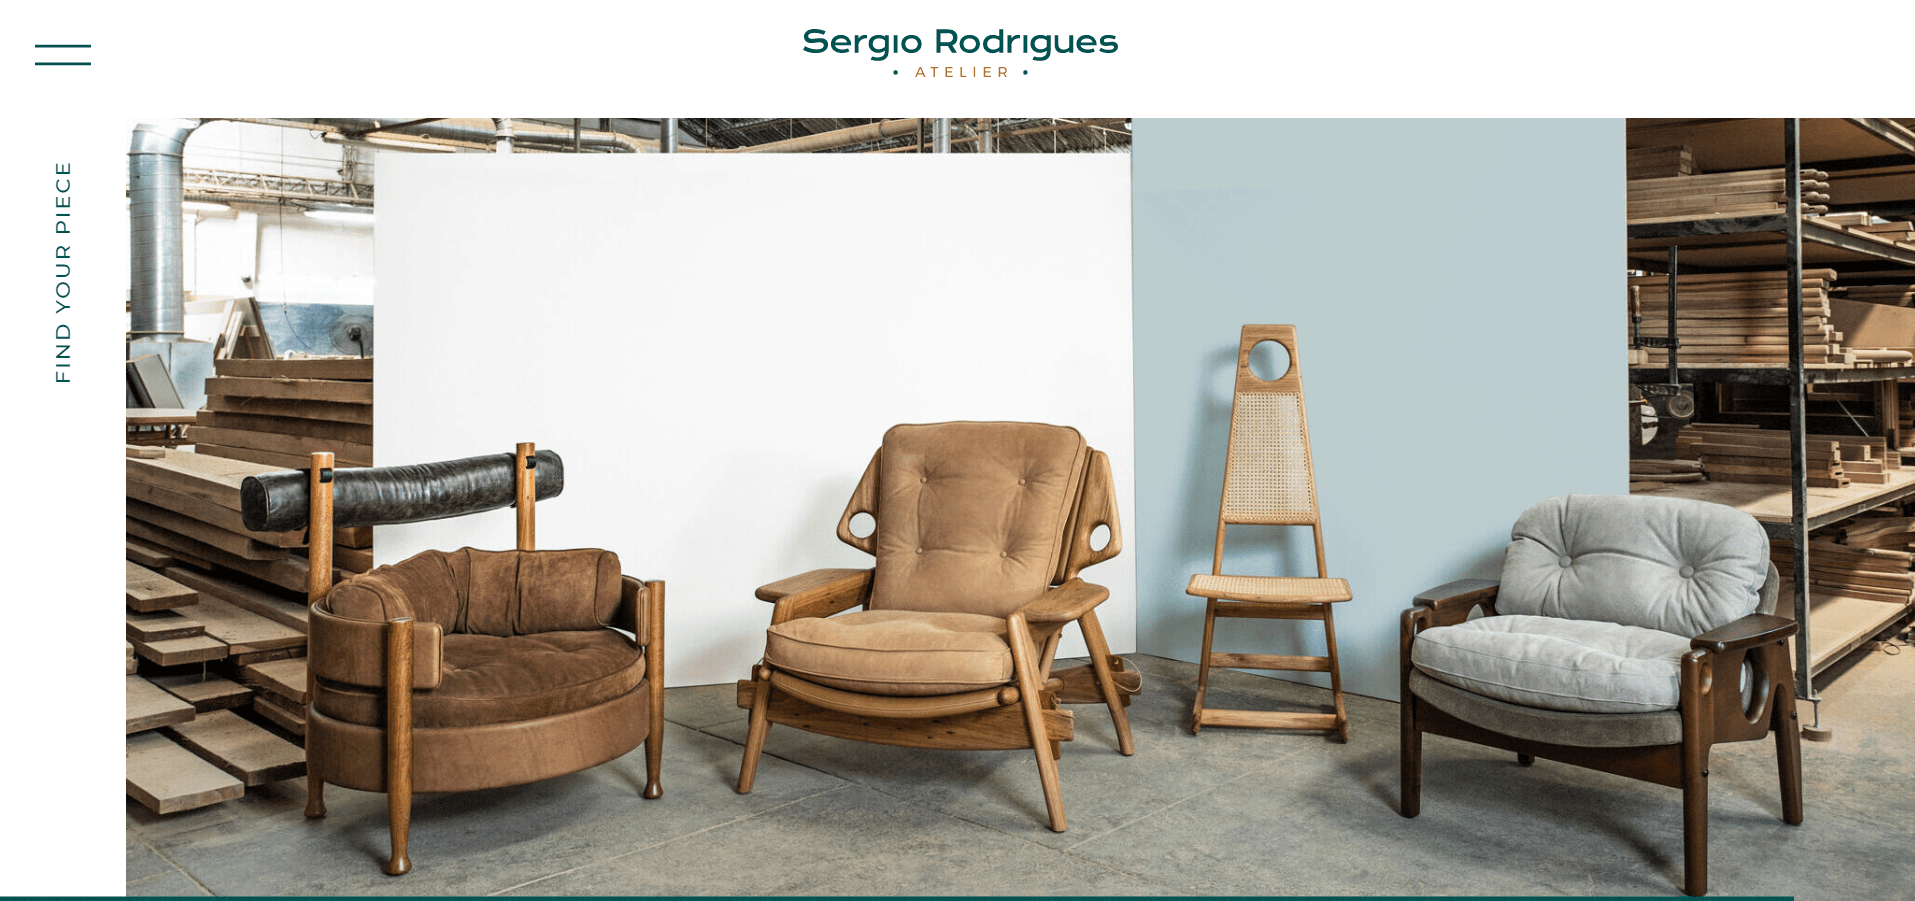 Landing page of Sergio Rodrigues Atelier 